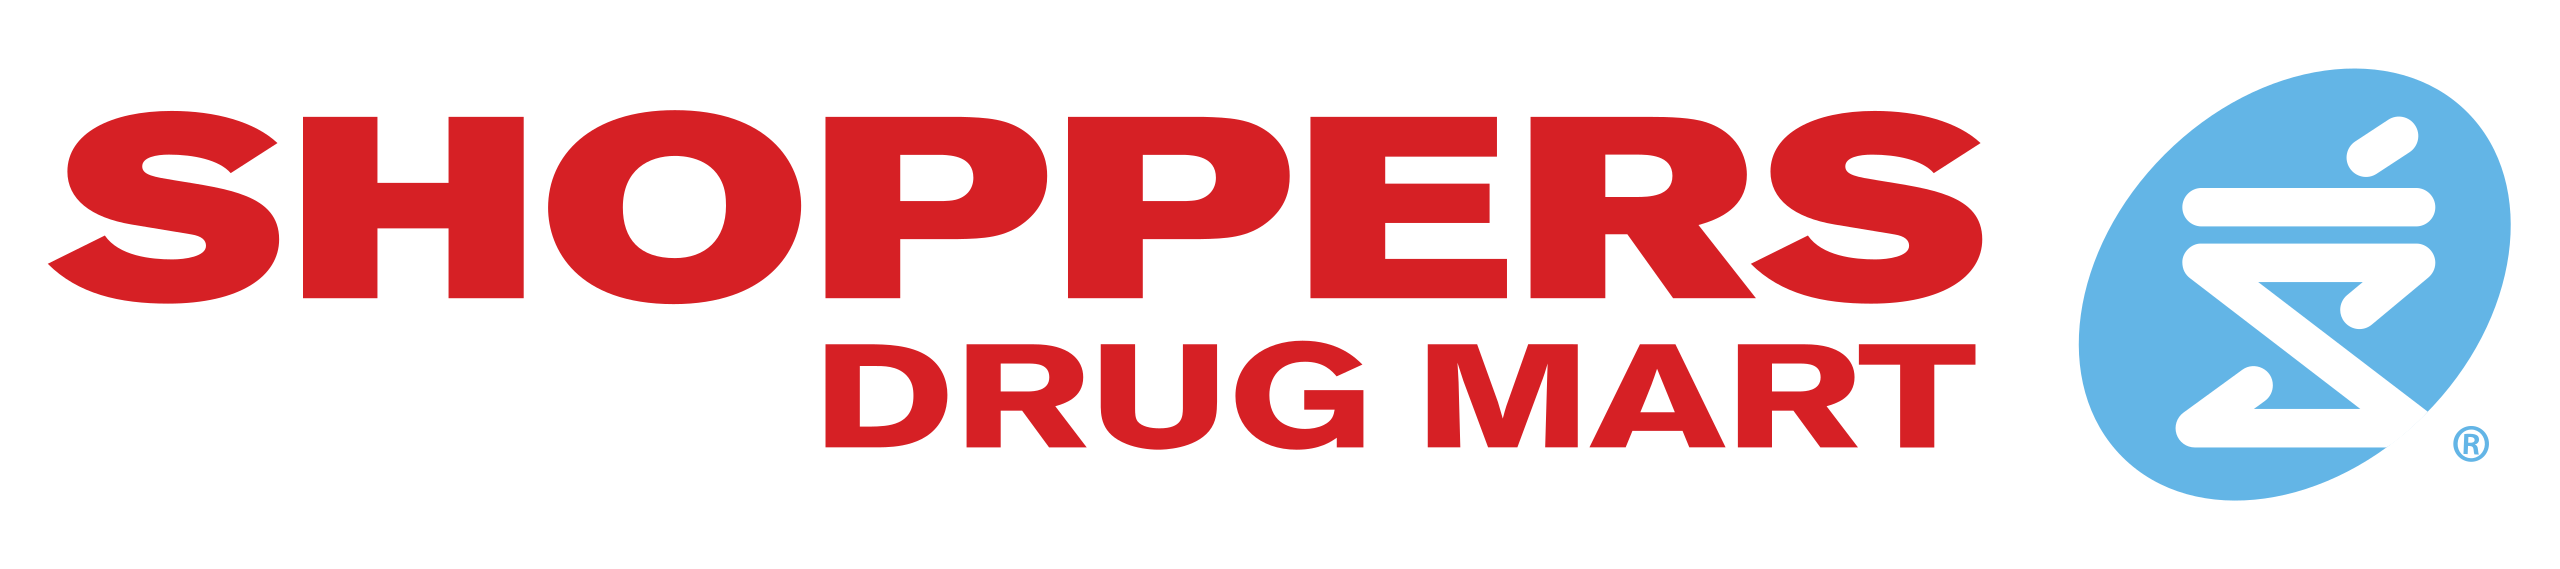 File:Shoppers-Drug-Mart-Logo.svg - Simple English Wikipedia, the